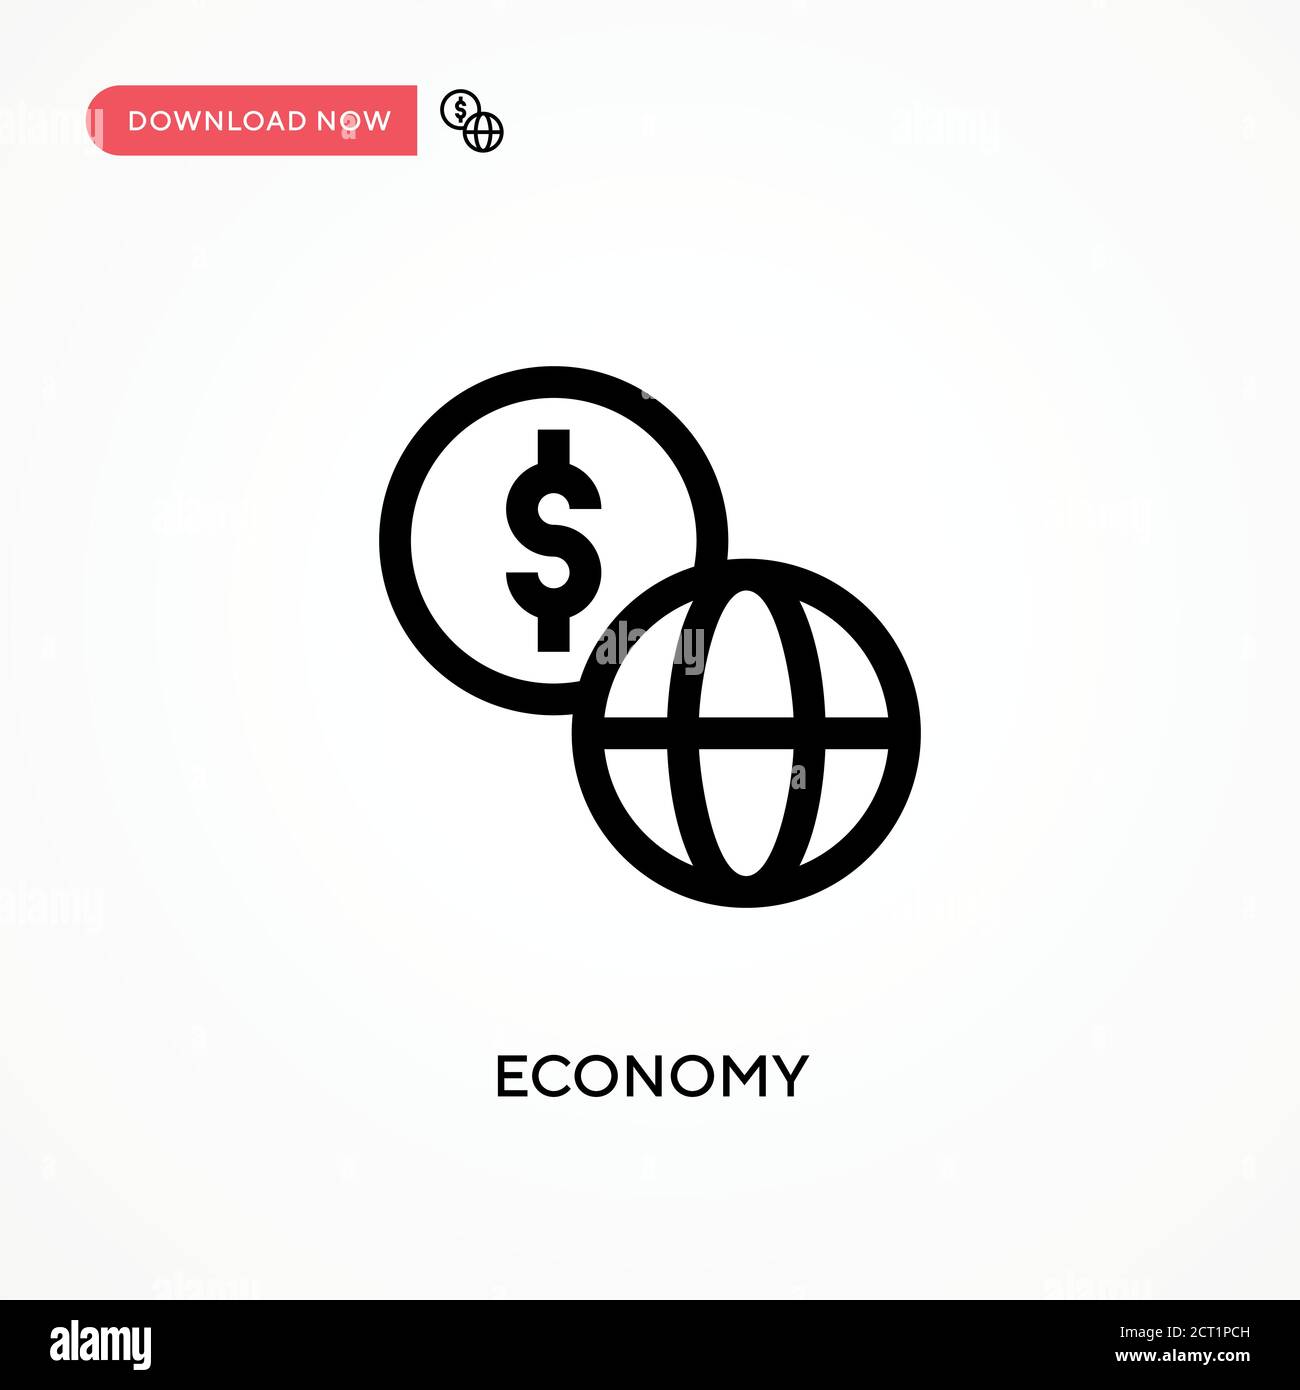 Economy Simple vector icon. Modern, simple flat vector illustration for web site or mobile app Stock Vector